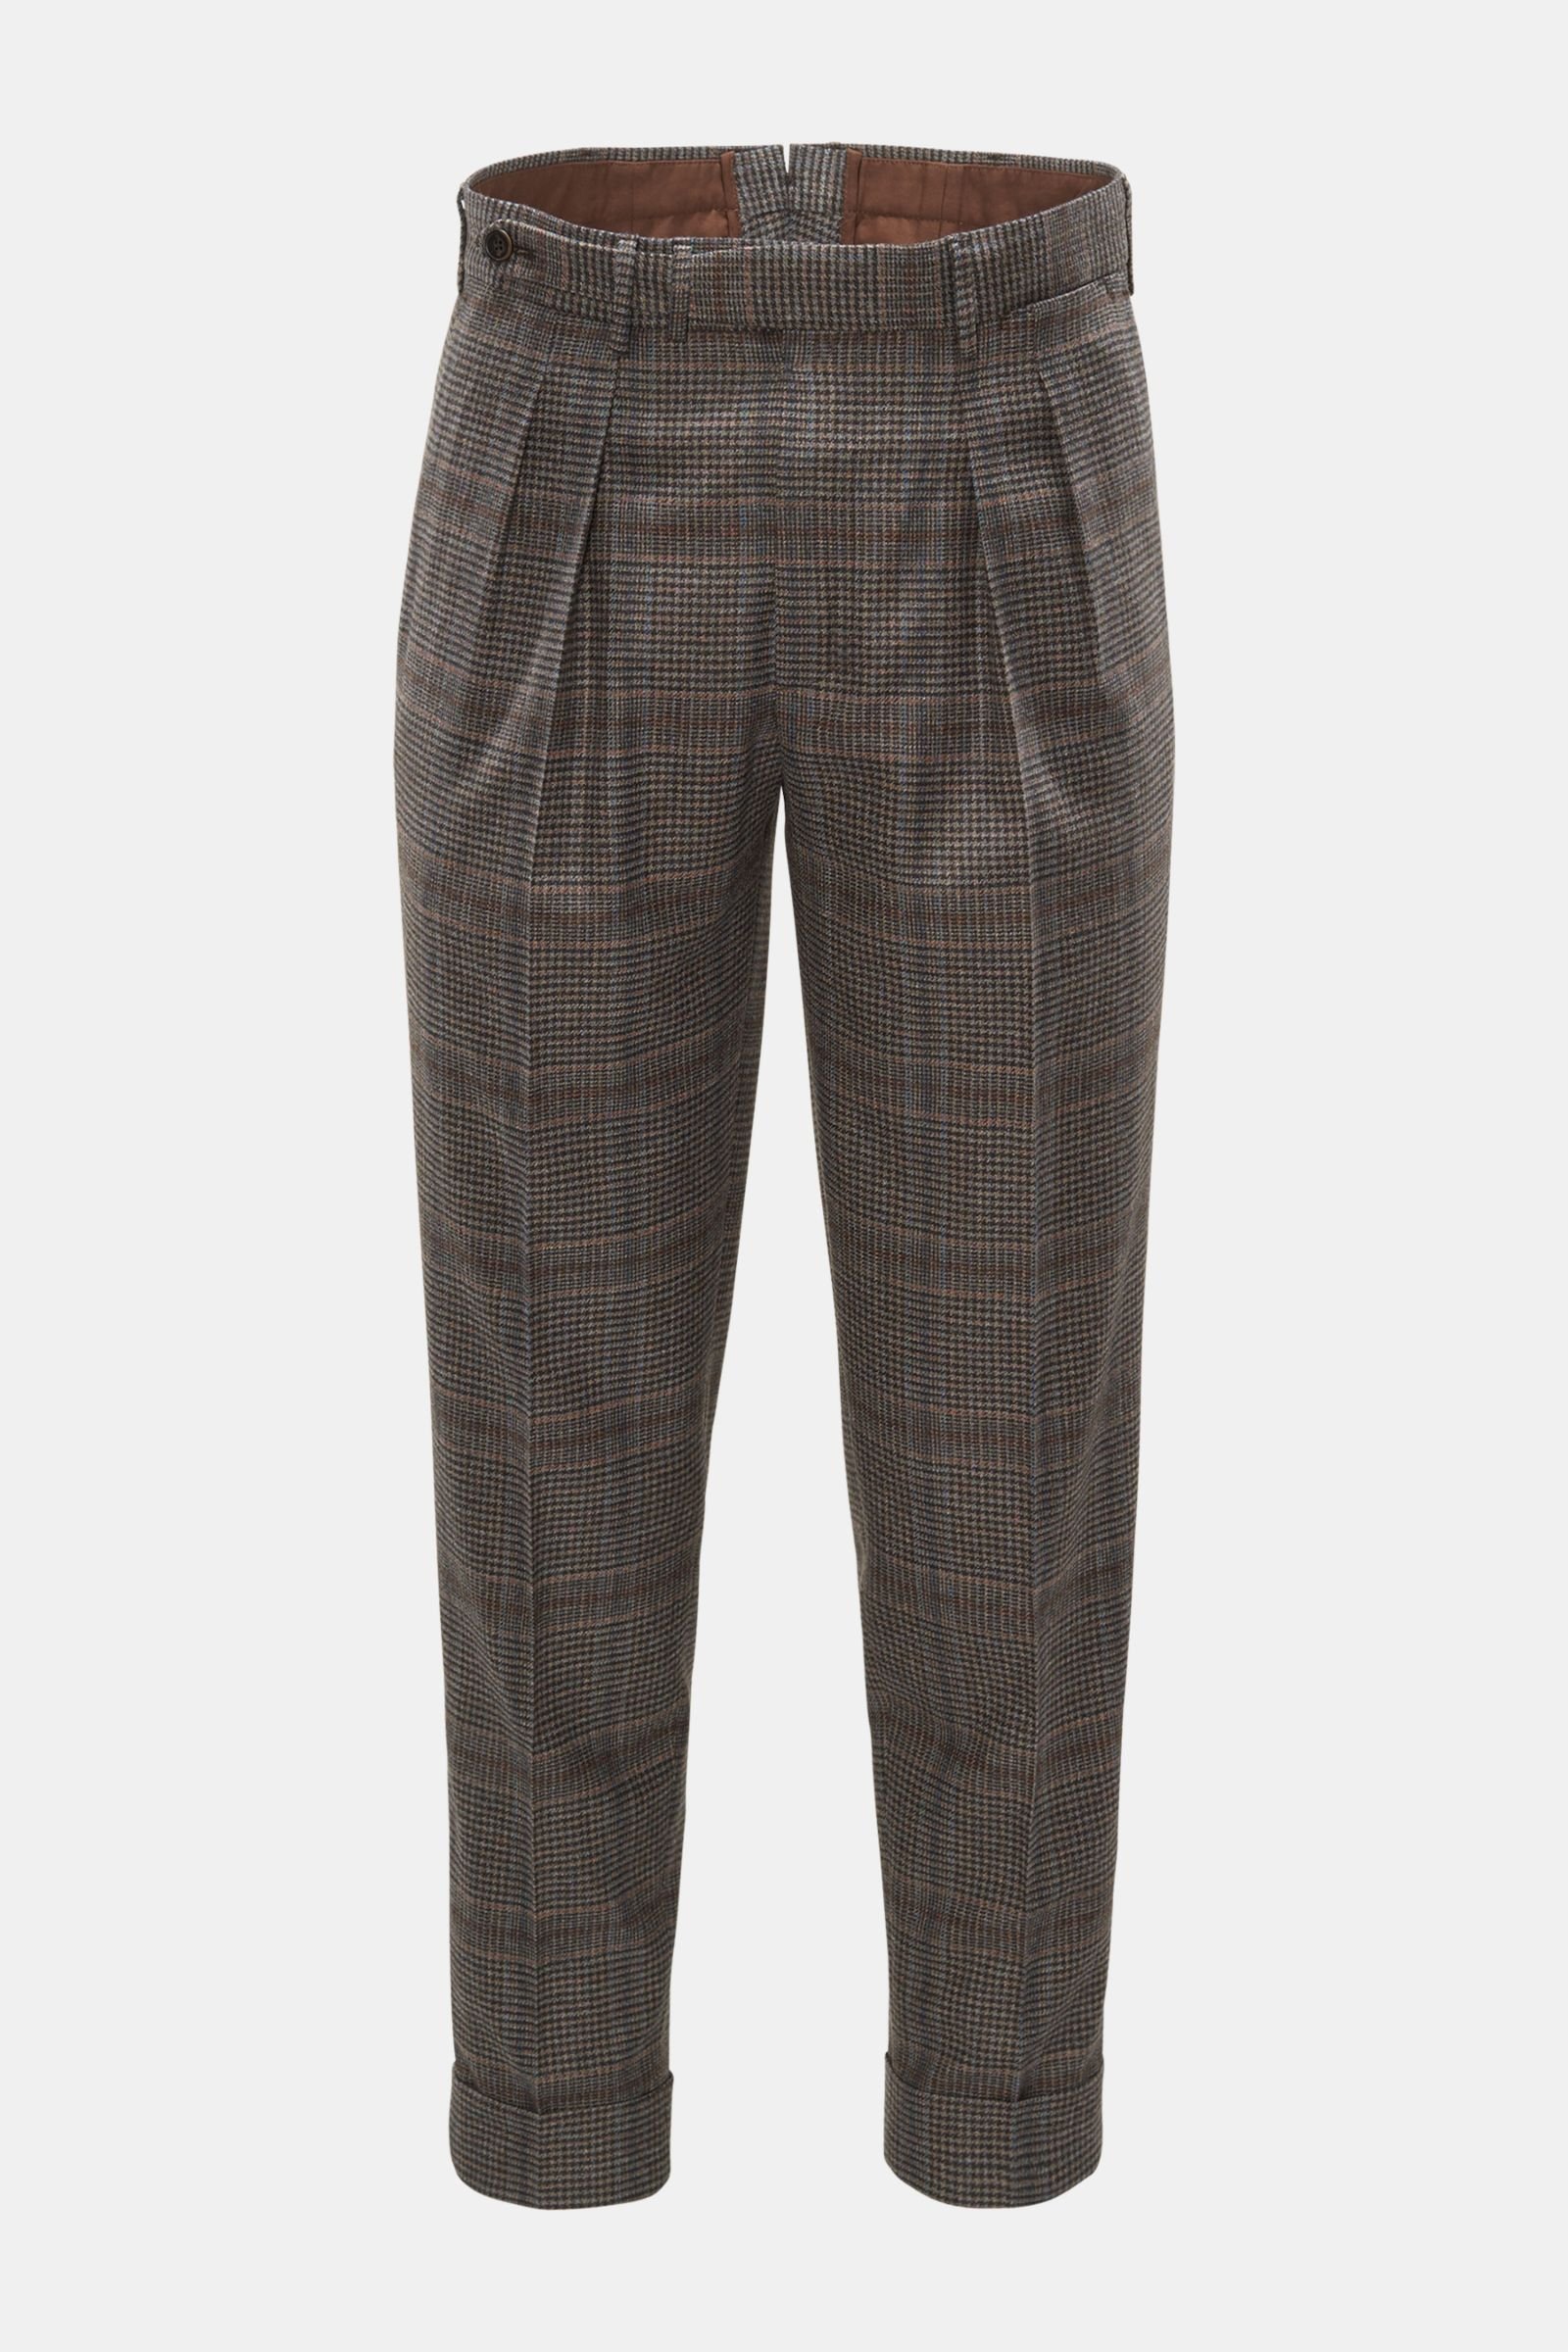 Trousers 'Carrot Fit' grey-brown/blue/orange checked